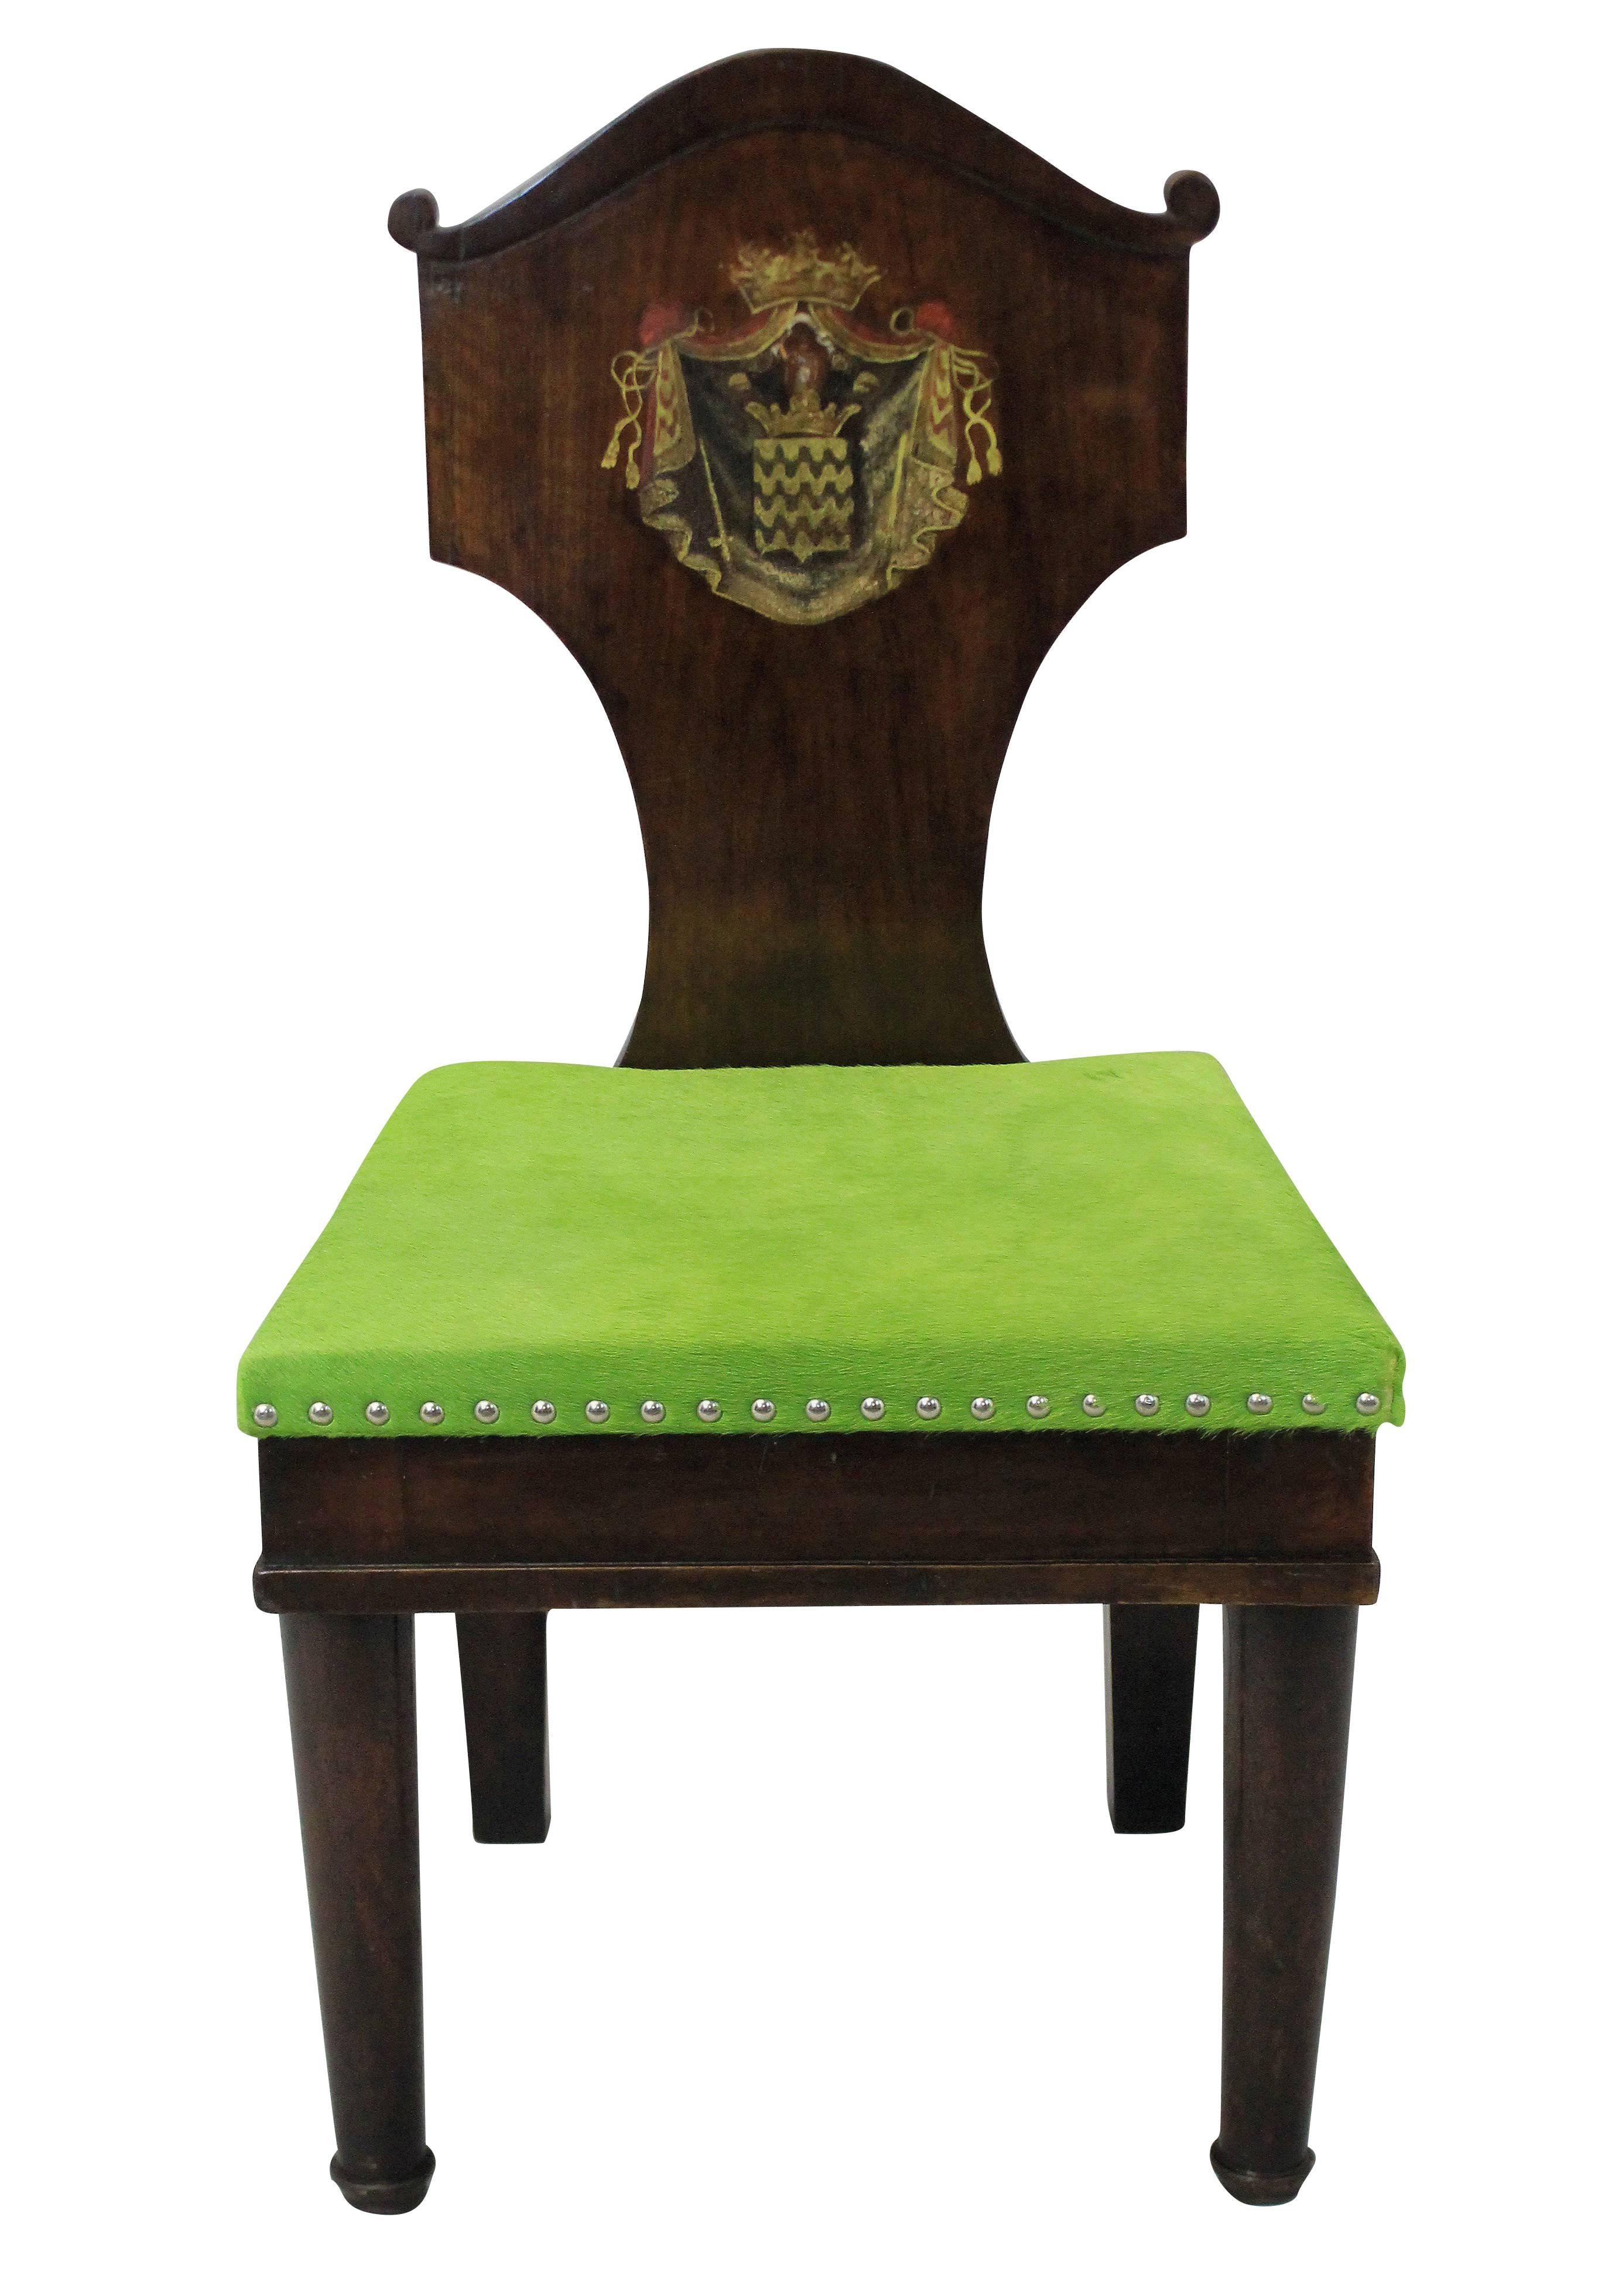 A pair of large scale 18th century hall chairs in the manner of Thomas Hope. In mahogany with hand painted armorial crests. Newly upholstered in lime green cow hide.

   